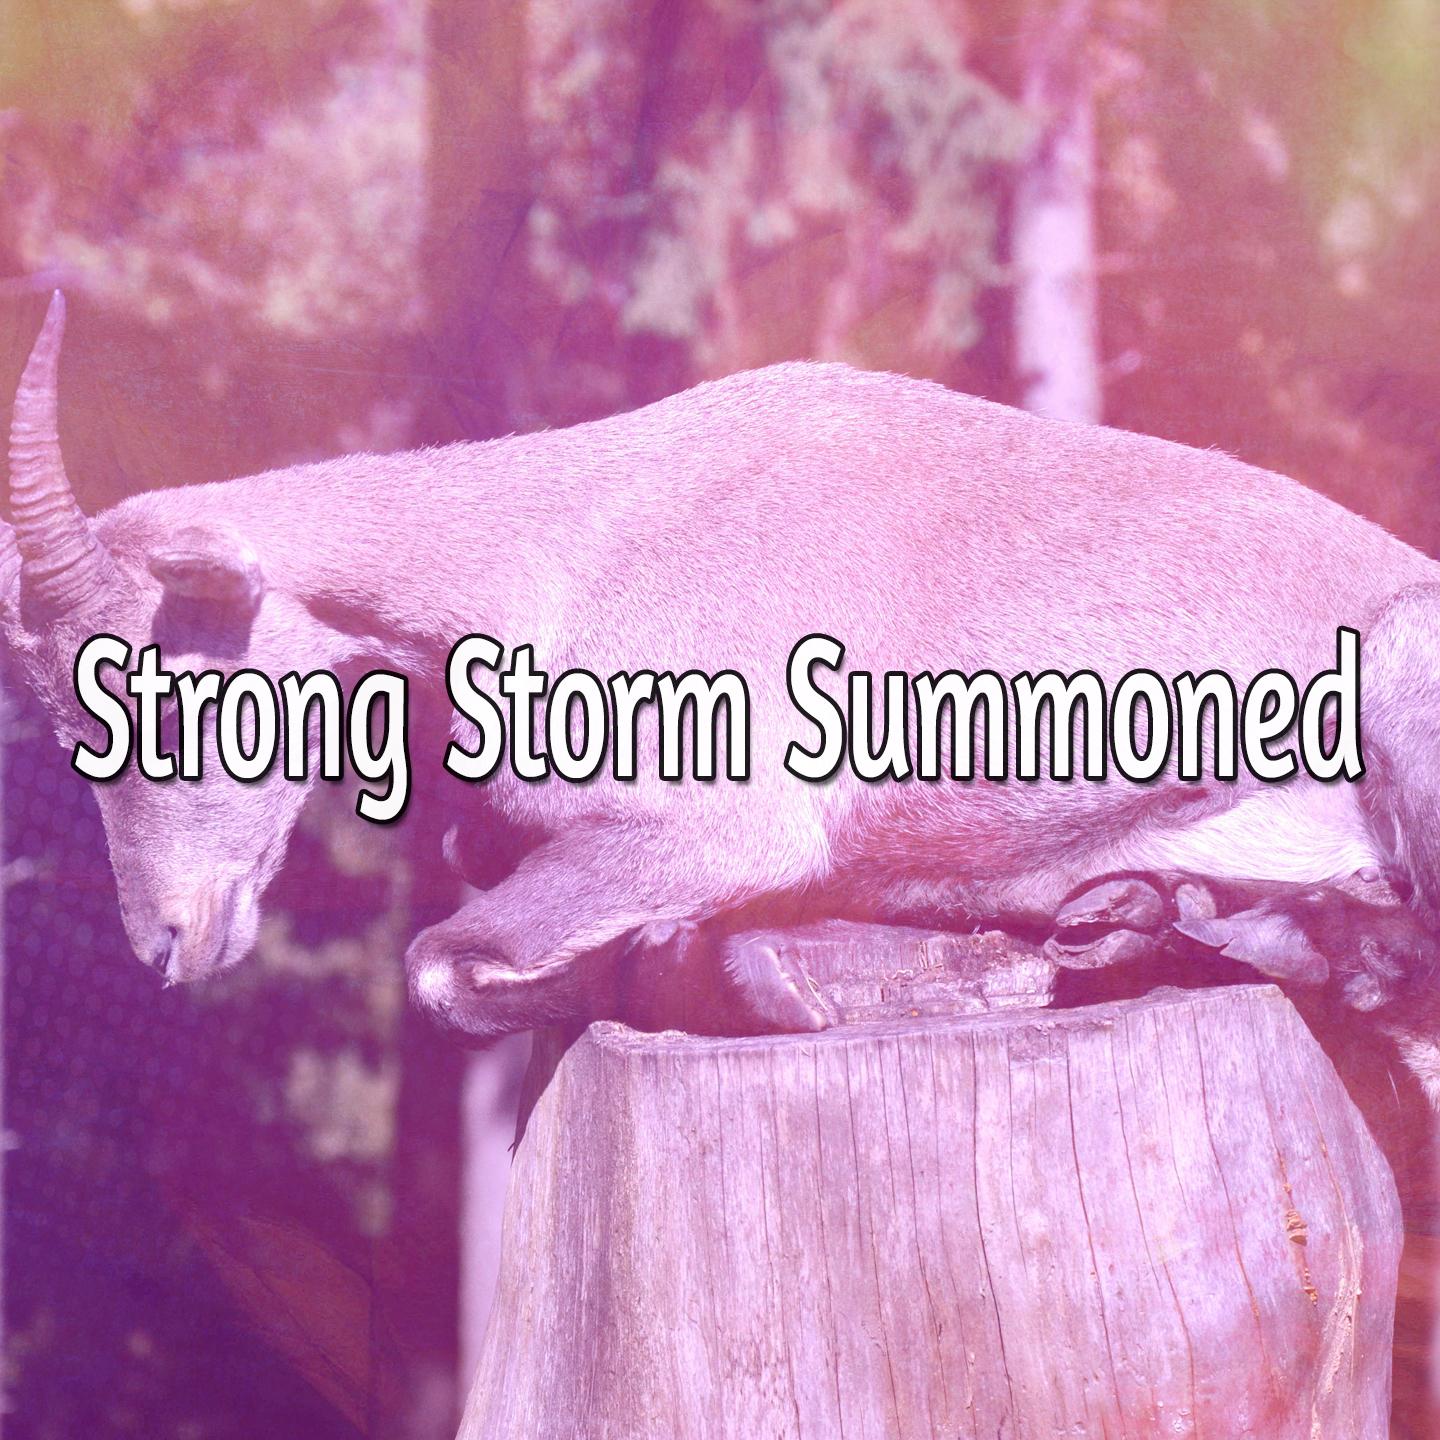 Strong Storm Summoned